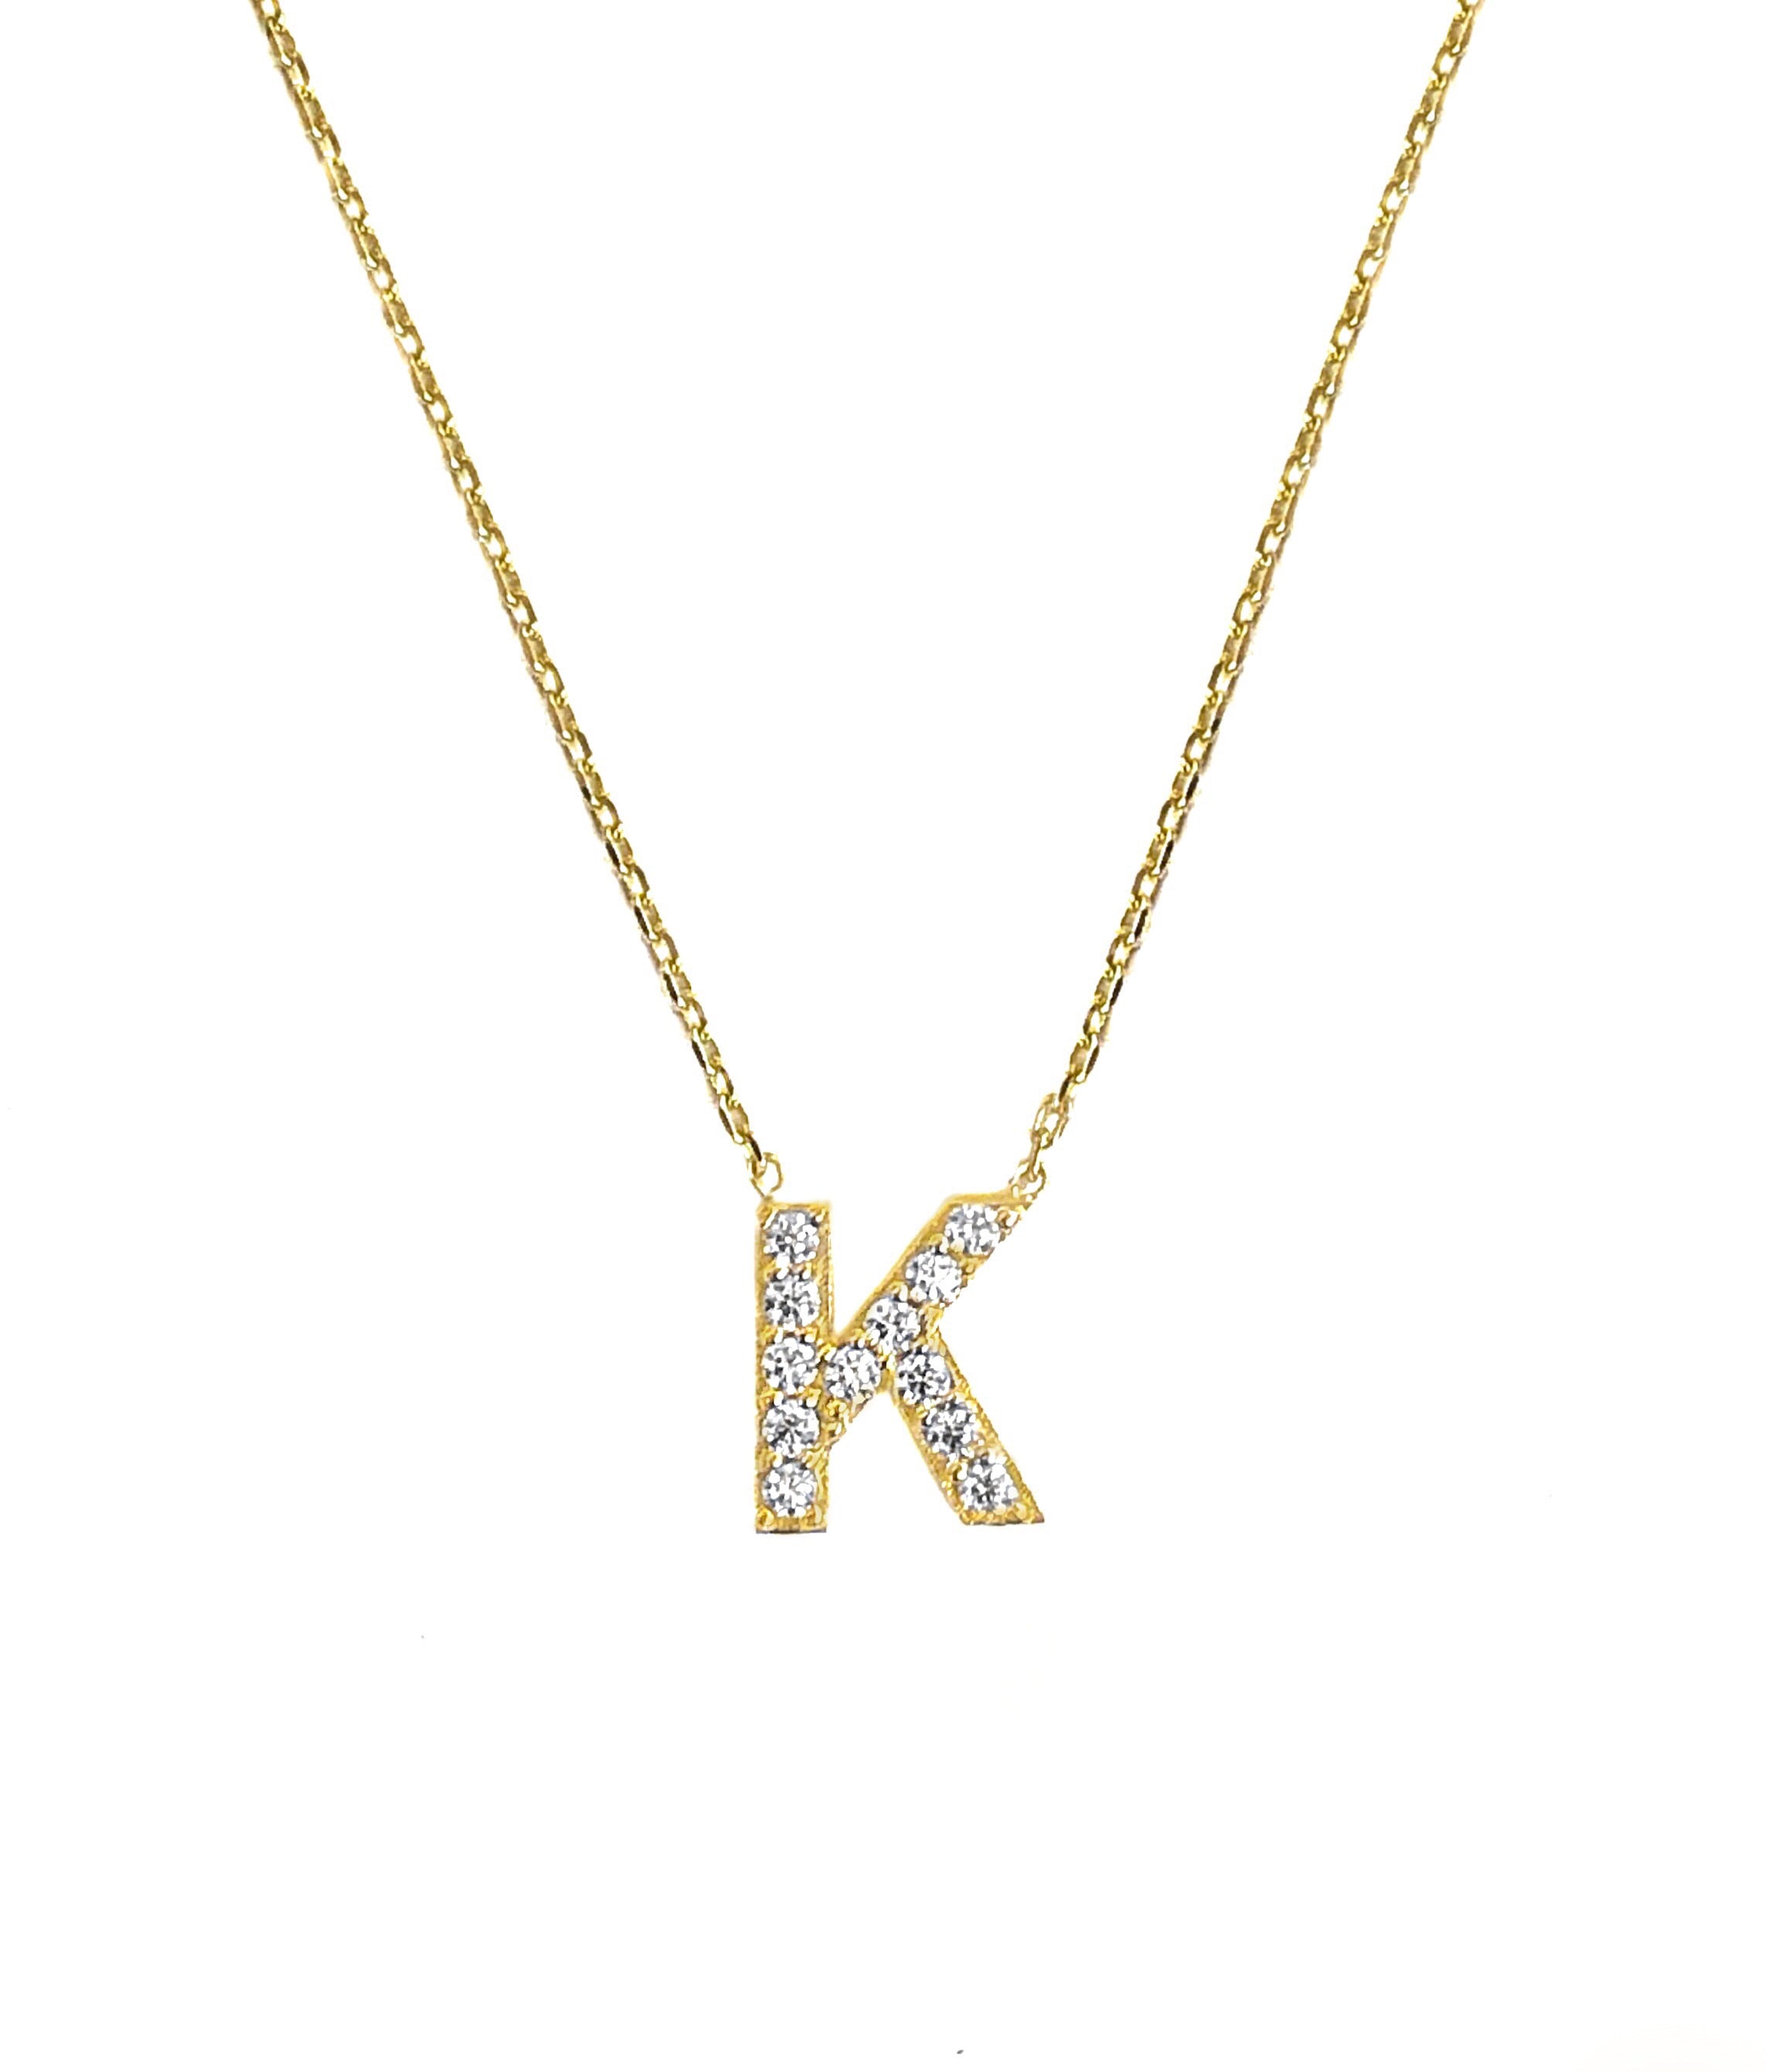 14K YELLOW GOLD FLOATING PAVE INITIAL NECKLACE